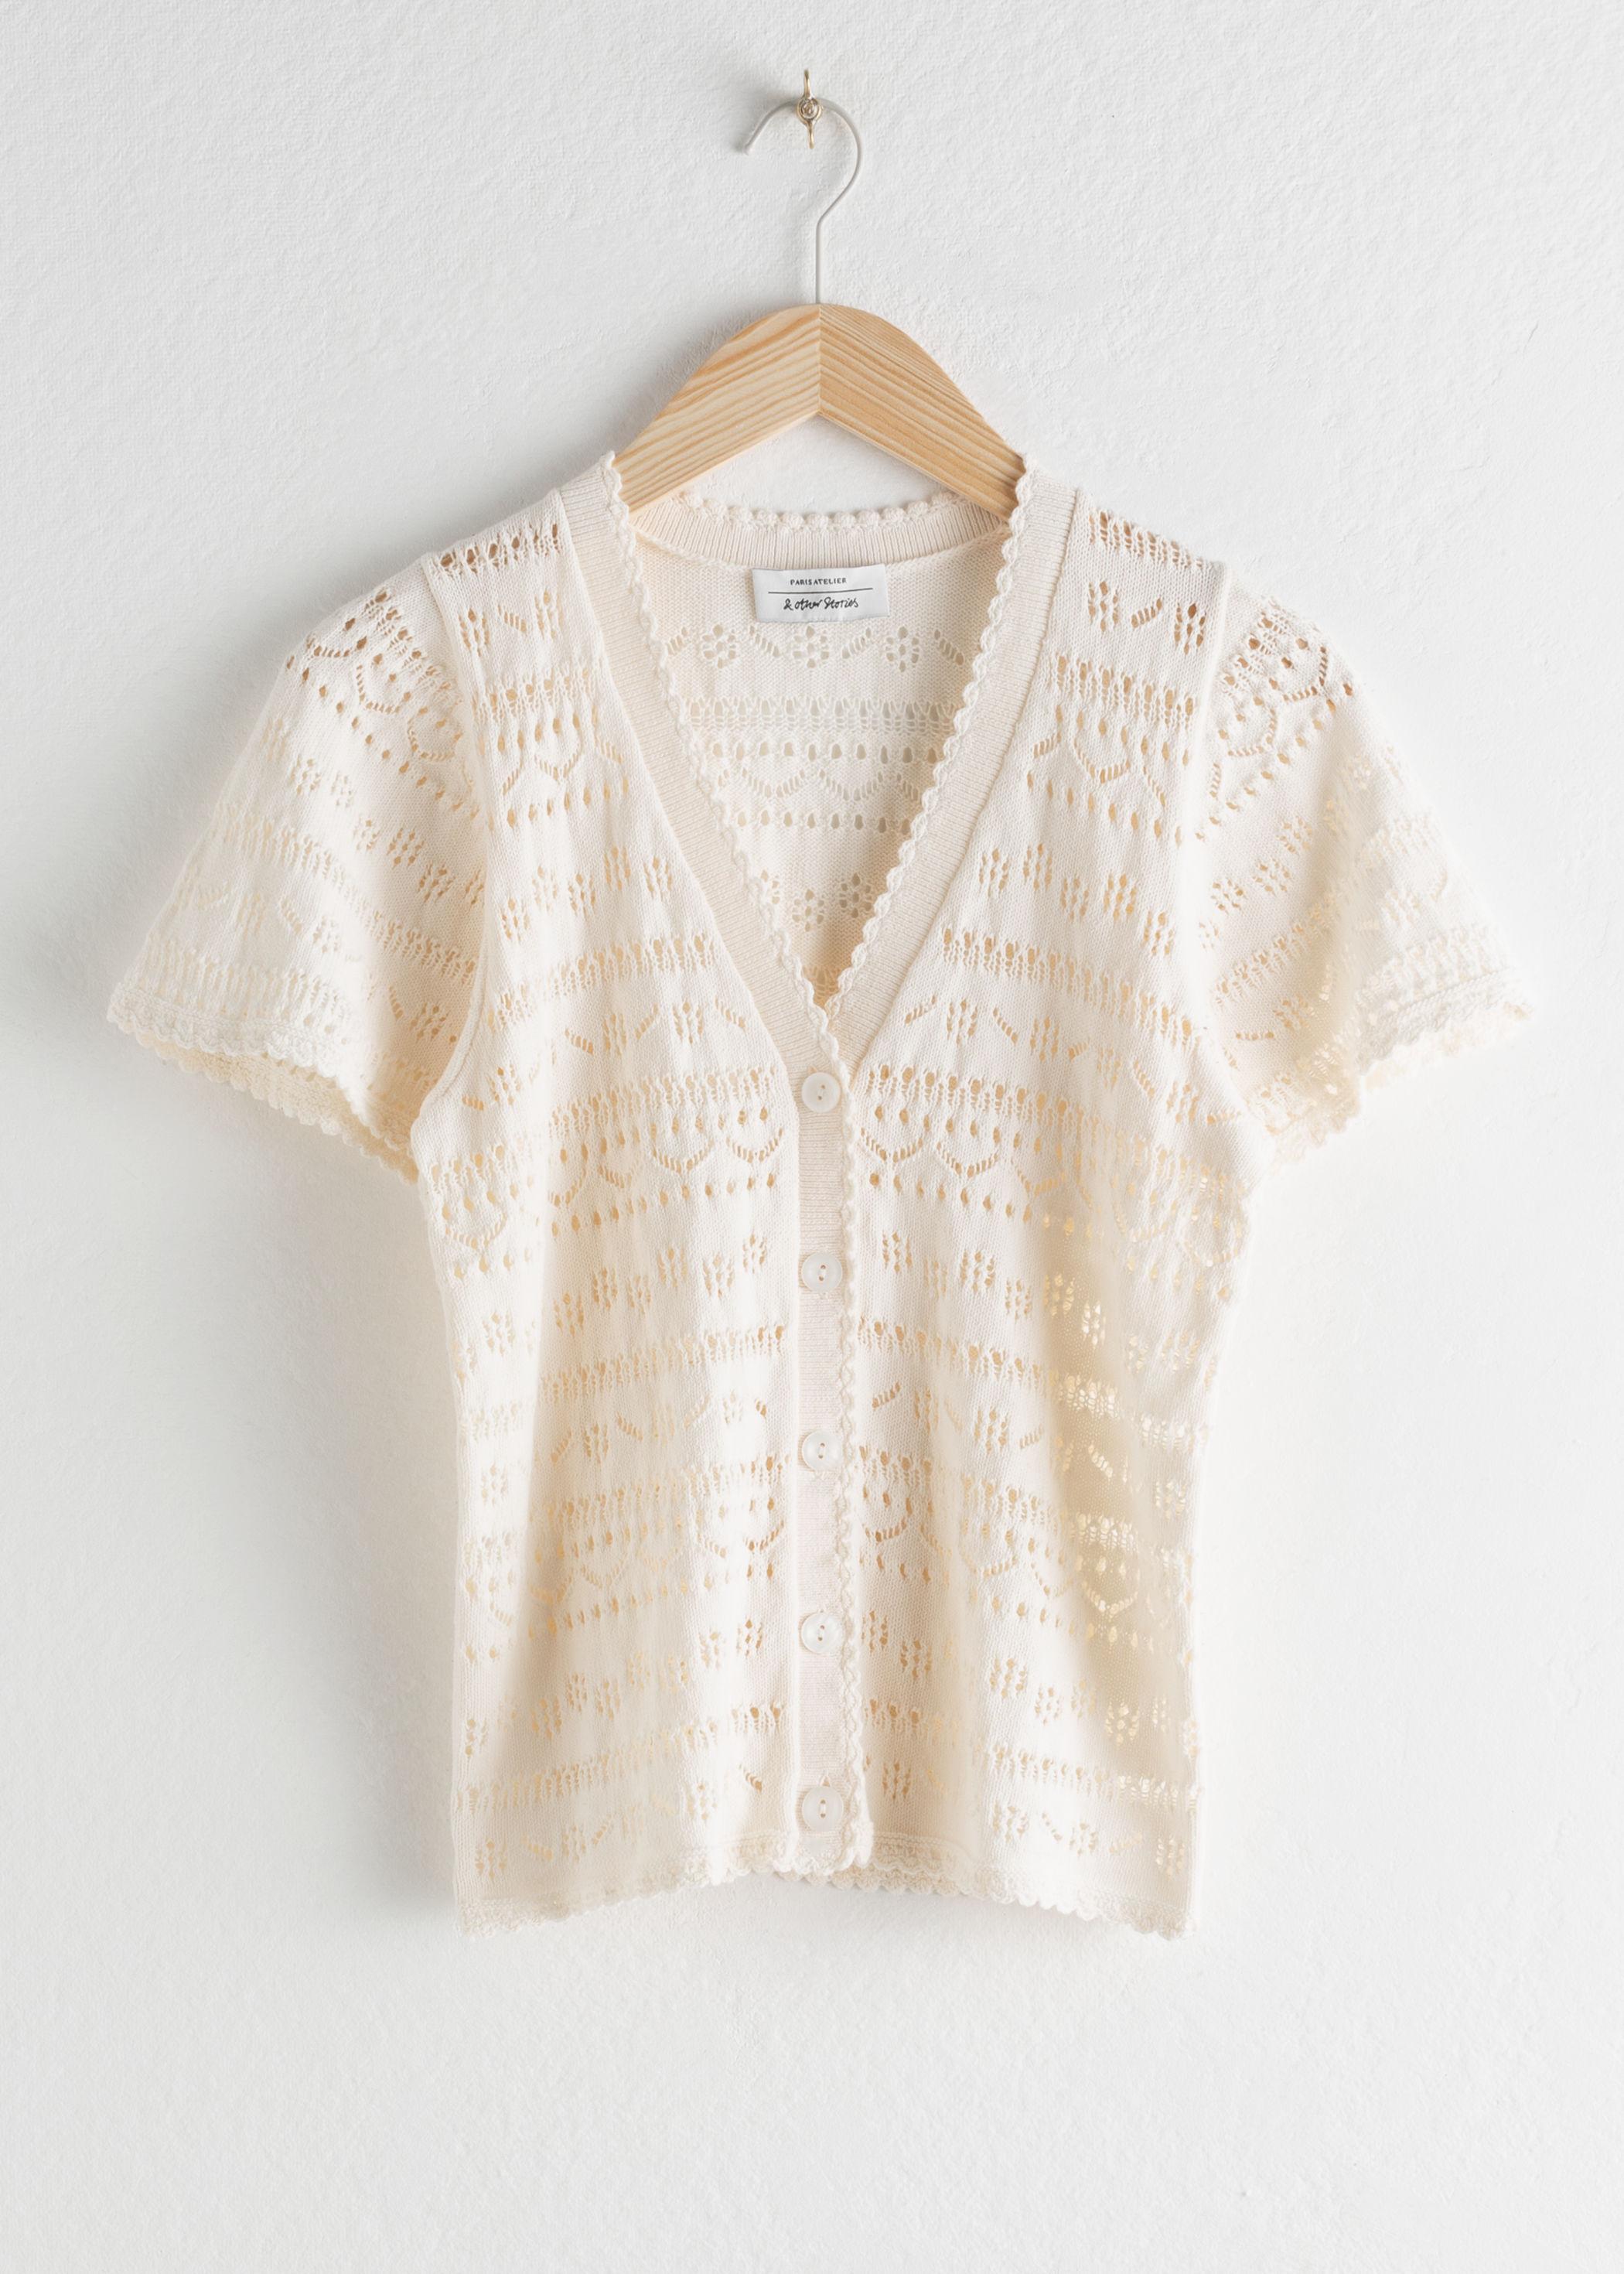 & Other Stories Cotton Crochet Short Sleeve Cardigan in White | Lyst